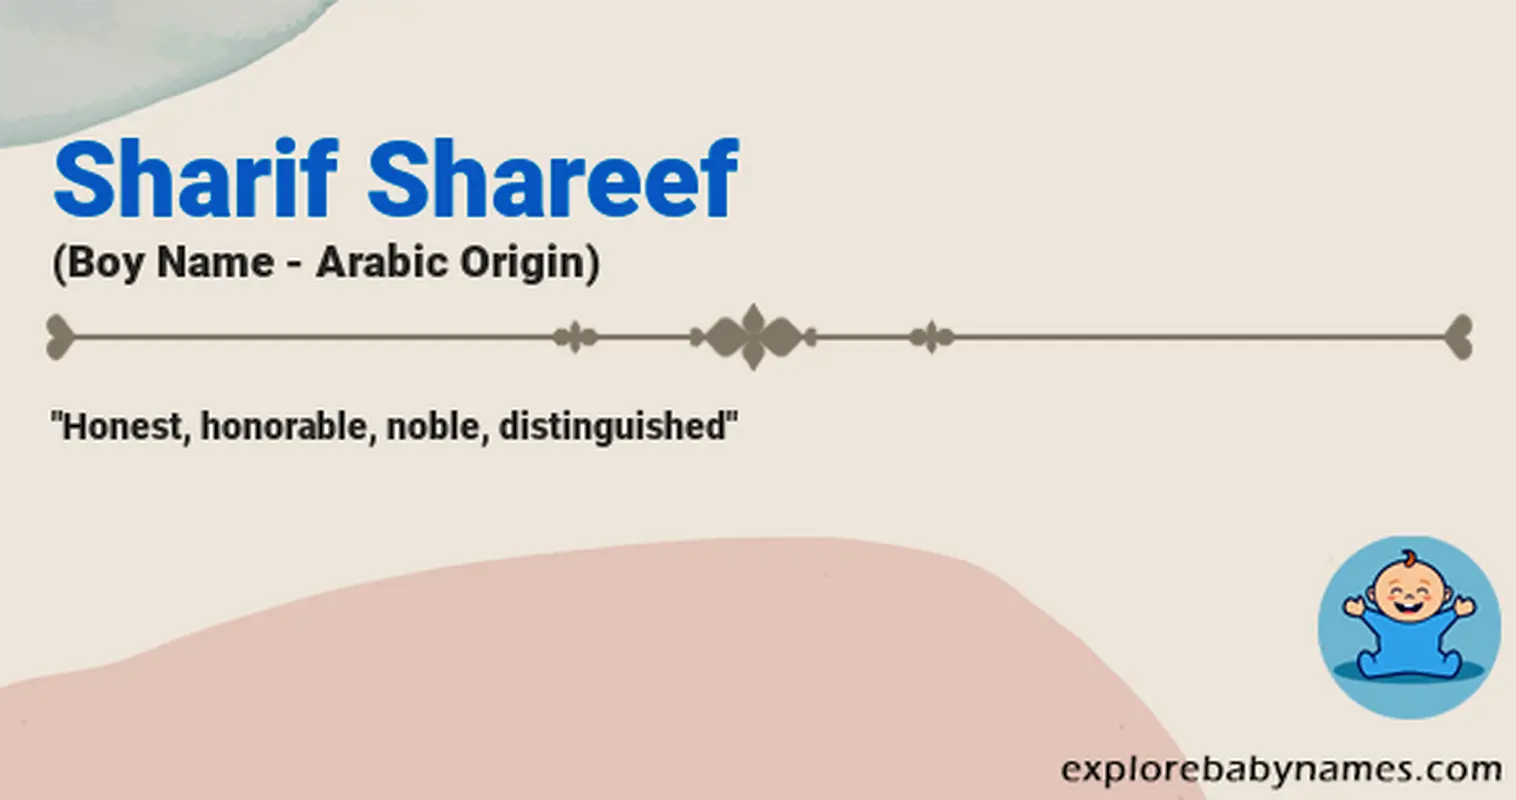 Meaning of Sharif Shareef